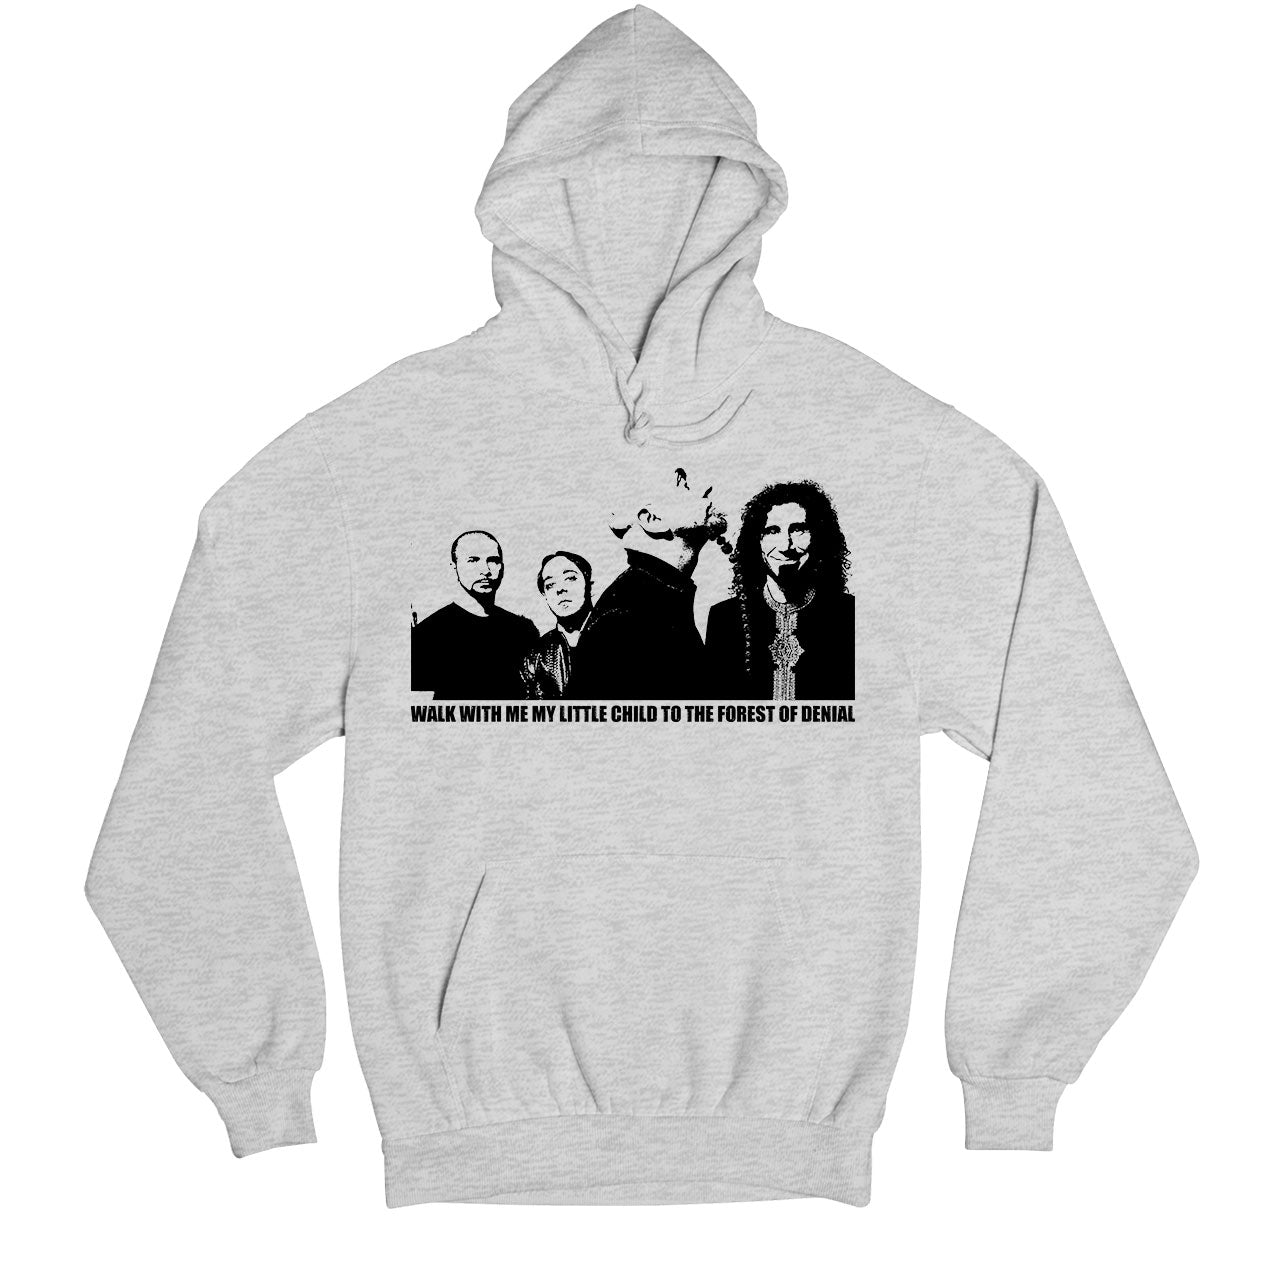 system of a down forest hoodie hooded sweatshirt winterwear music band buy online usa united states of america the banyan tee tbt men women girls boys unisex gray